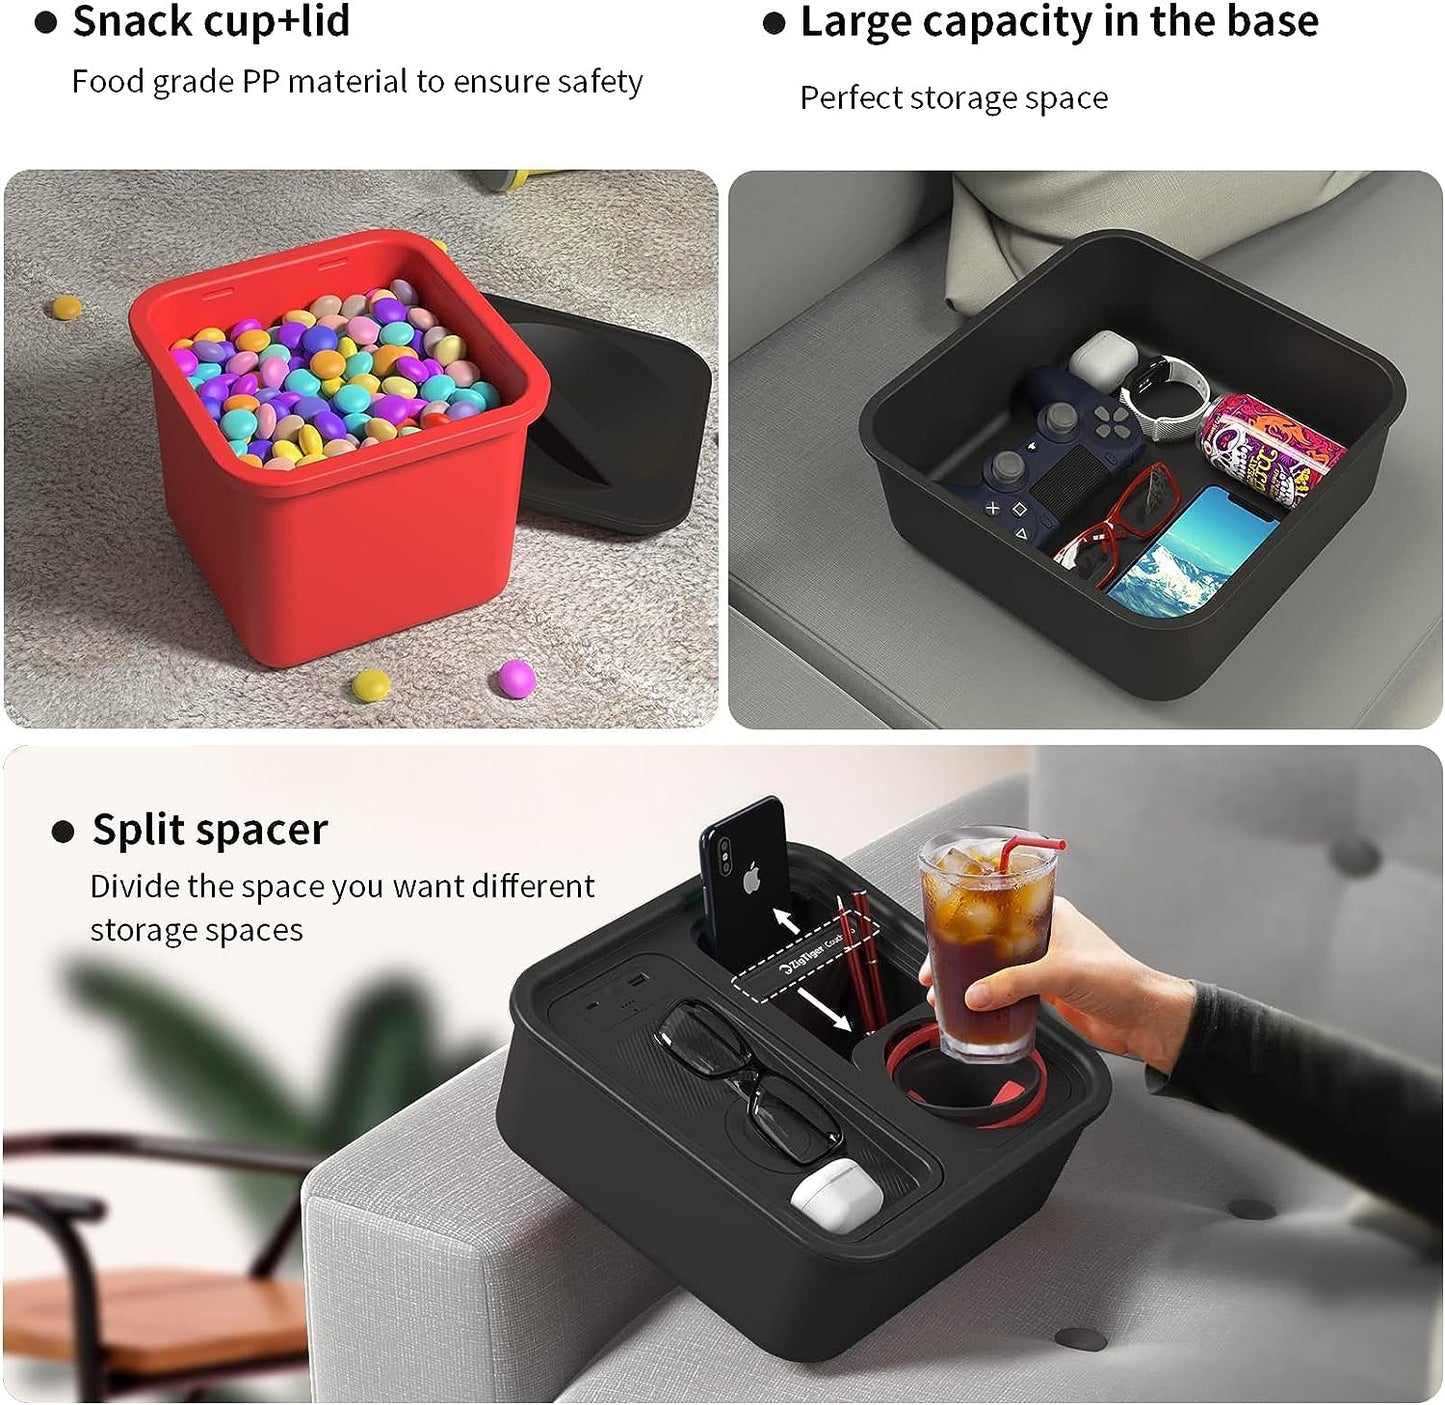 A+ Cup Holder Tray with Wireless Power Bank, Sofa Caddy with Self Balancing Cup Holder & Snack Cup, Sofa Armrest Table Tray, Couch Storage Organizer for Living Room, Car, Game,USB A+C Port